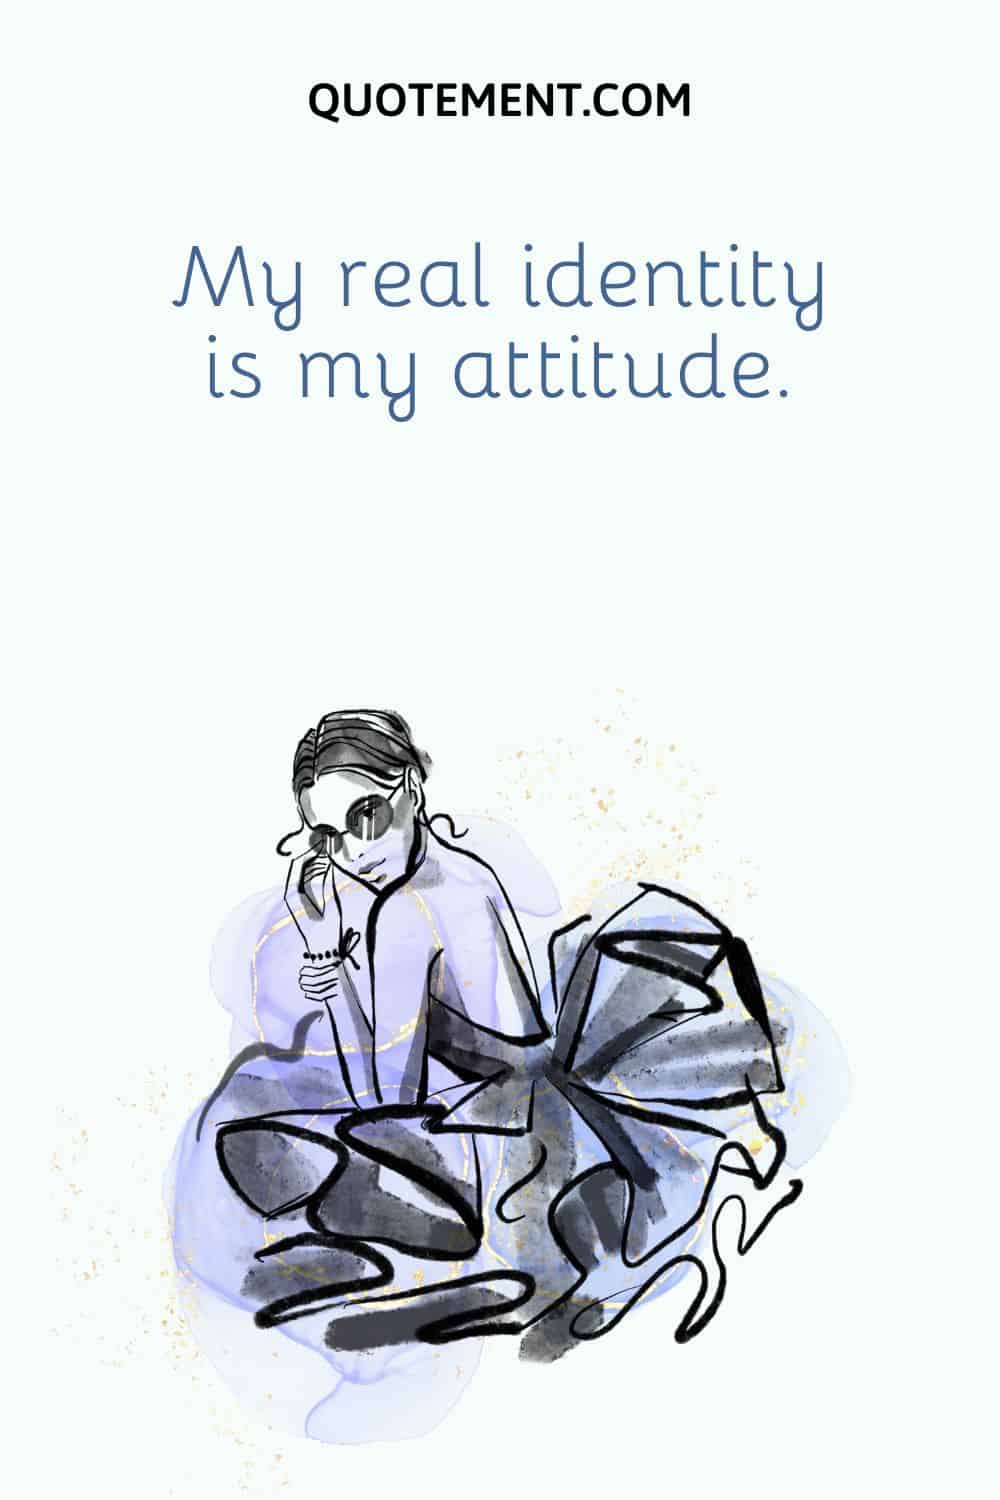 My real identity is my attitude